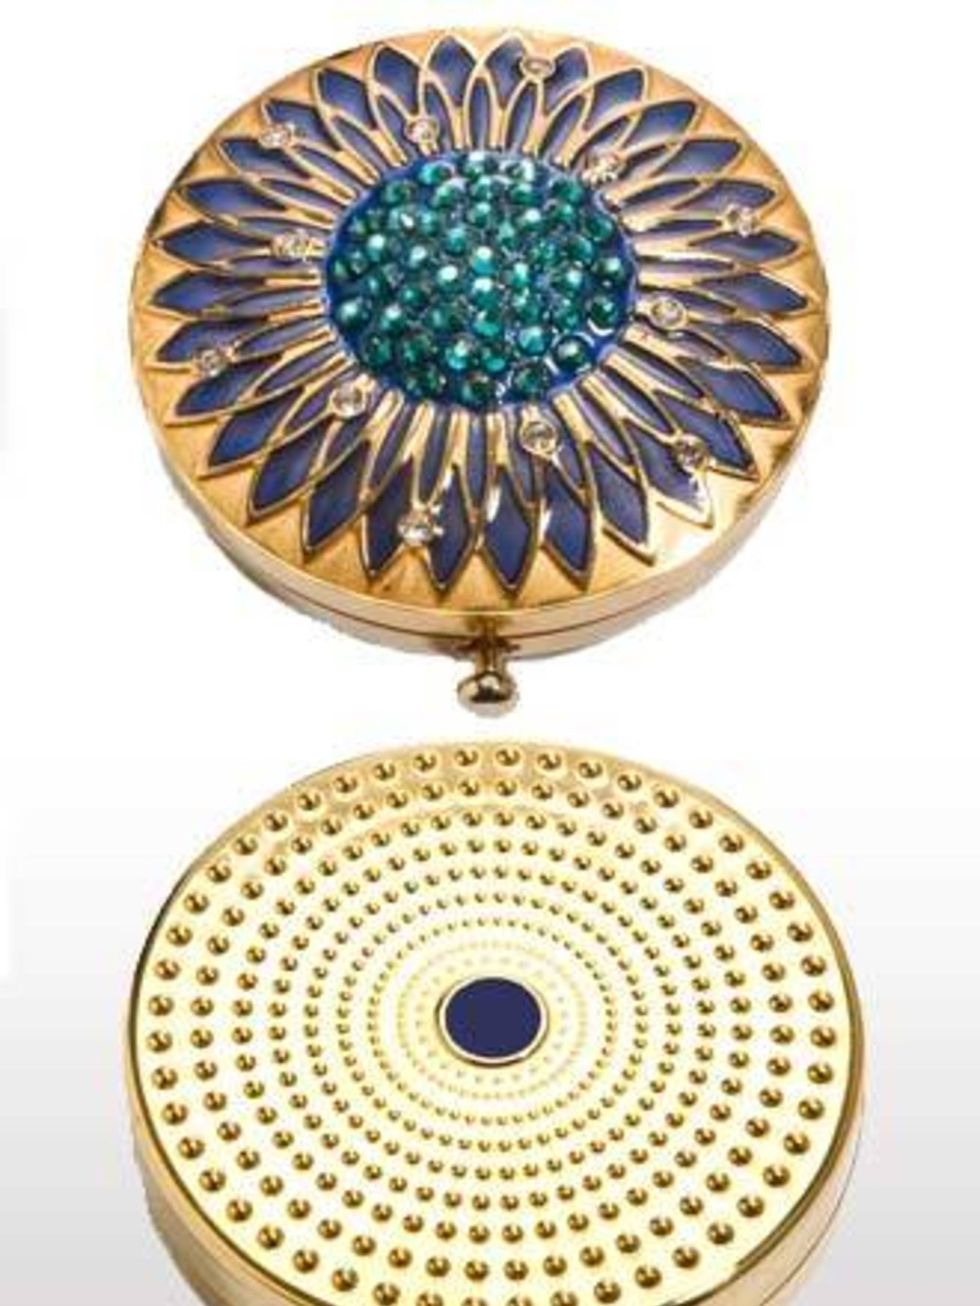 <p>Estee Lauder, Radiant Bloom Compact (top), £95 and Golden Sundial Compact, £55, both exclusive to <a href="http://www.harrods.com/">Harrods</a></p>